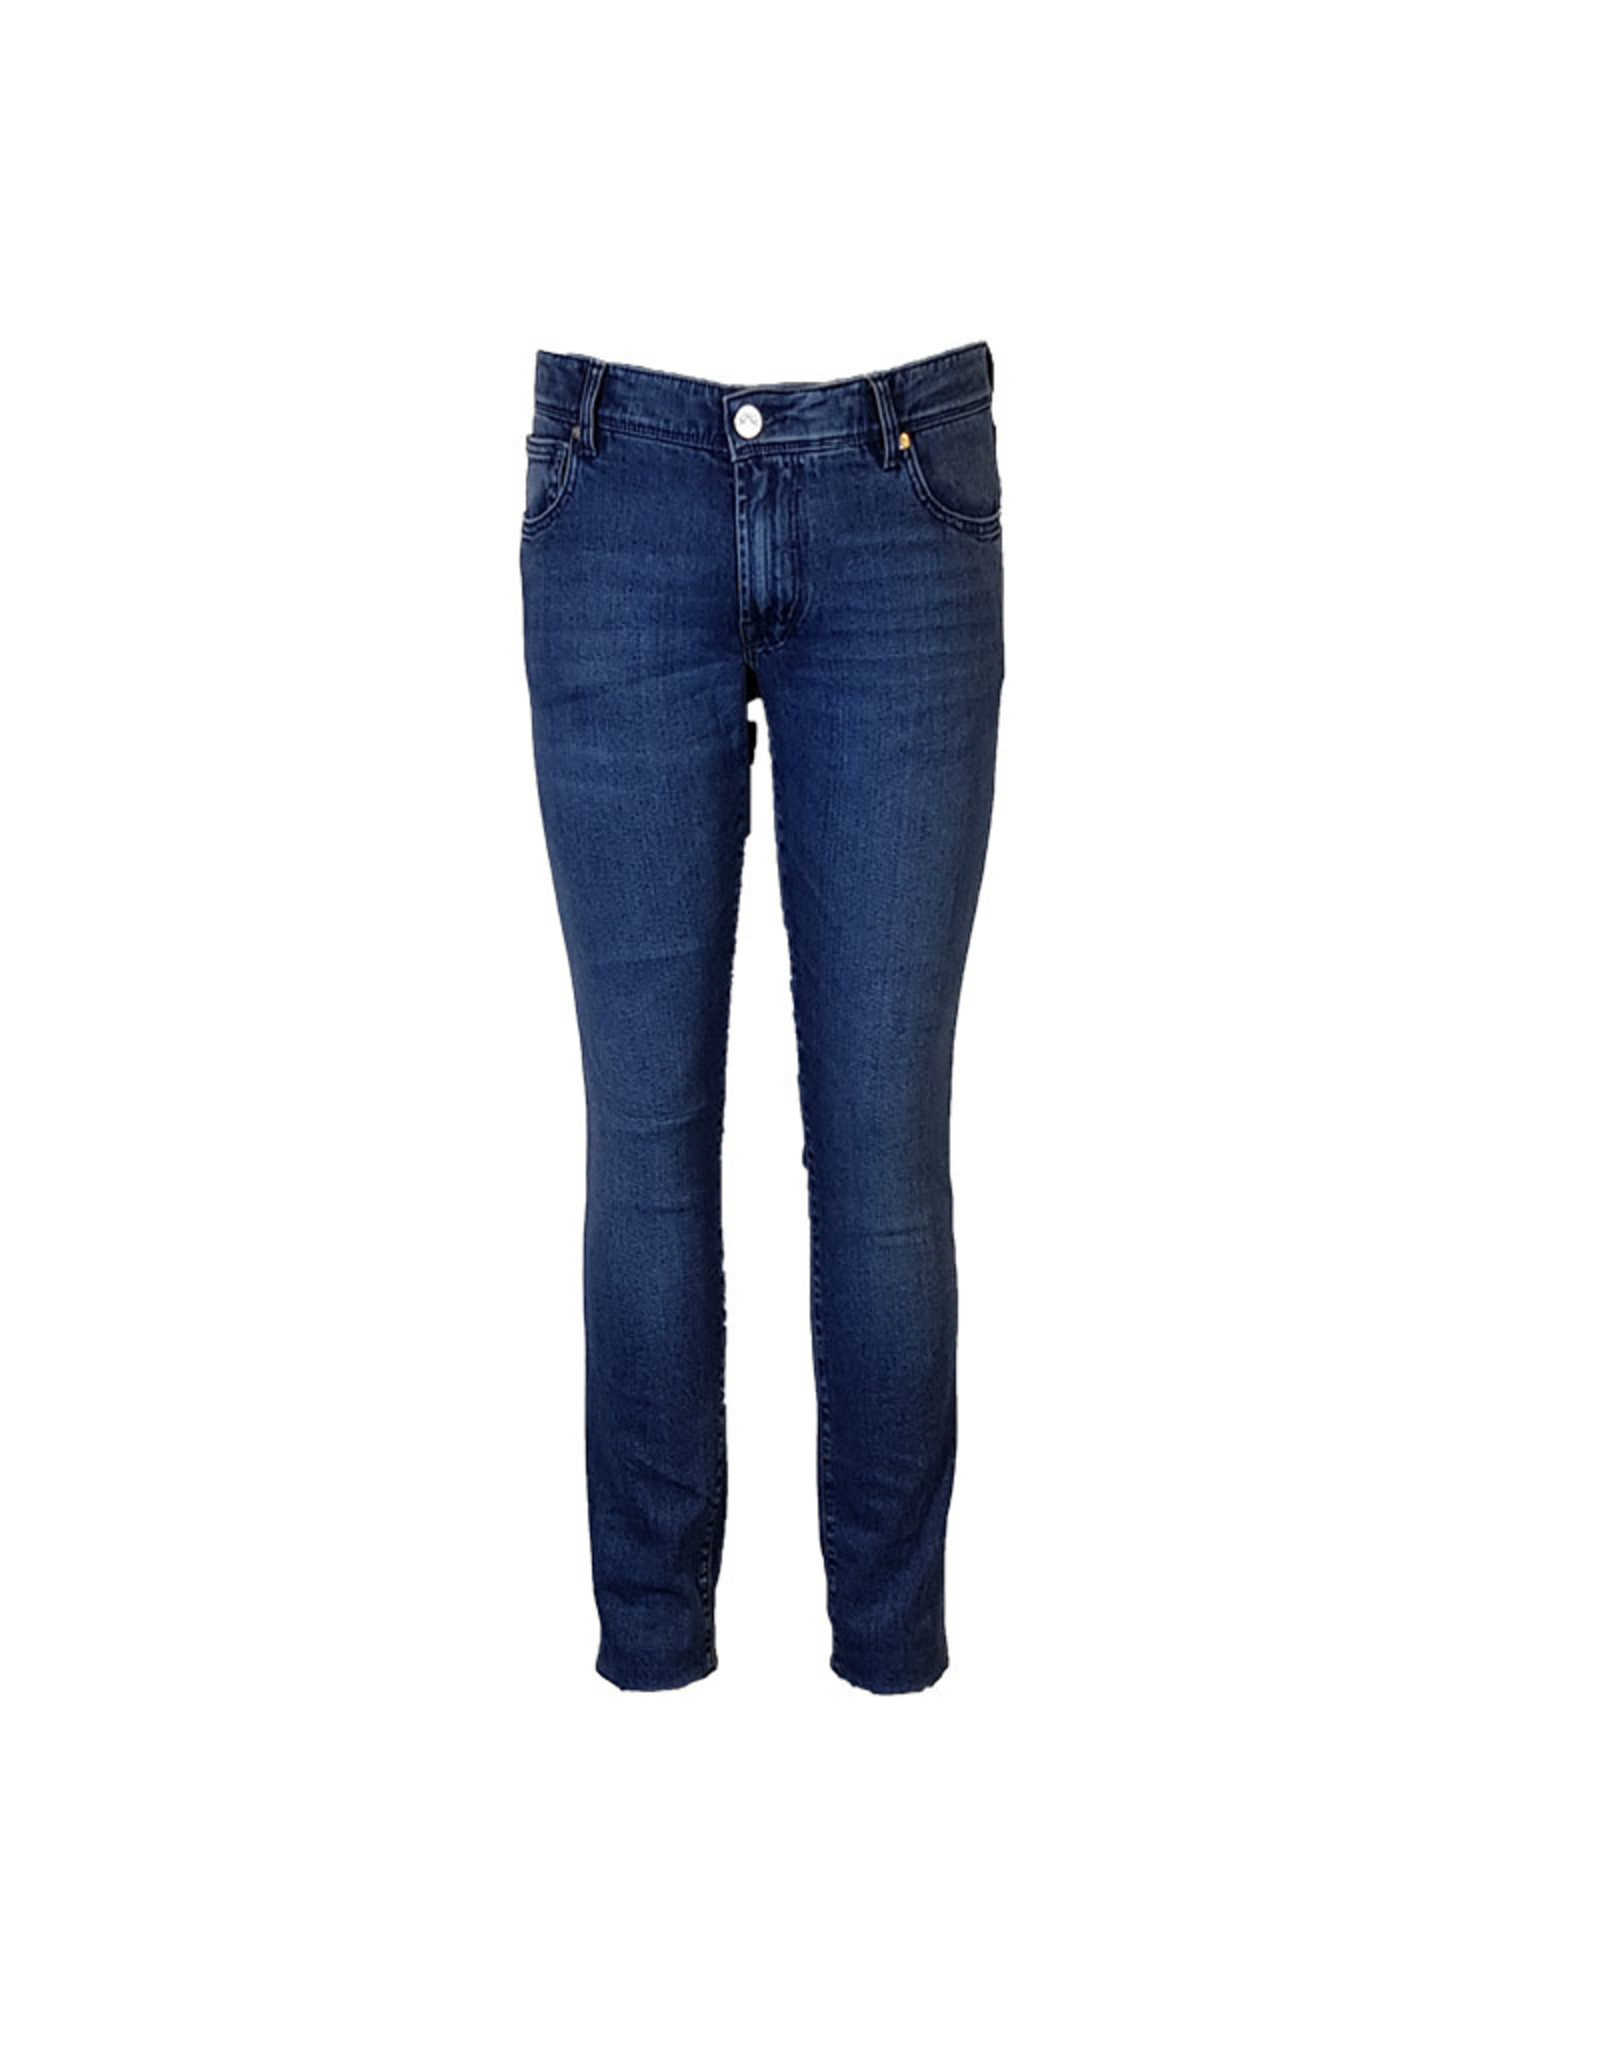 Candiani Candiani jeans mid blue 2402